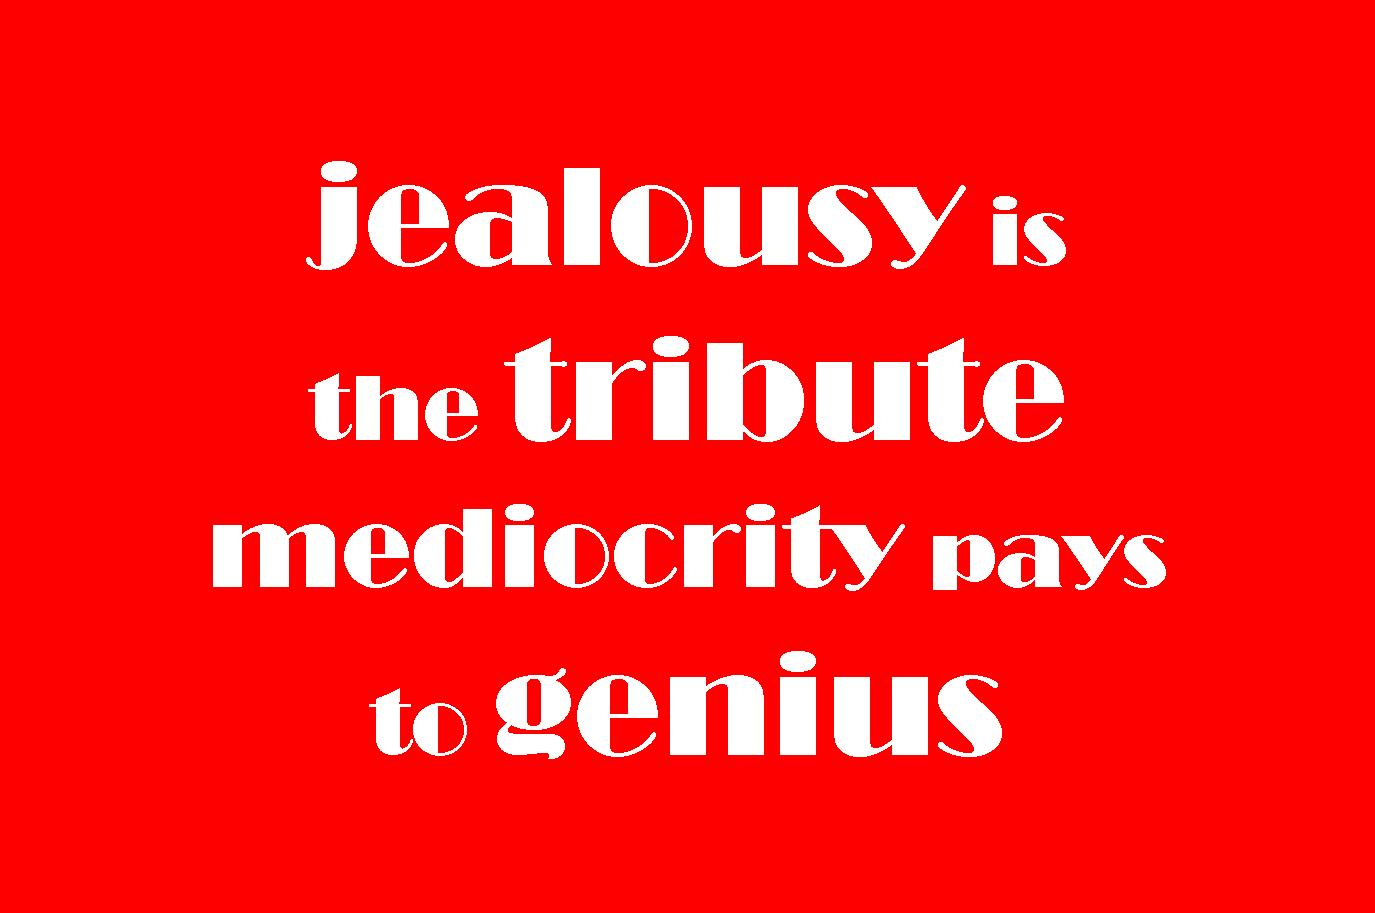 Quotes about Stupid jealousy (21 quotes)